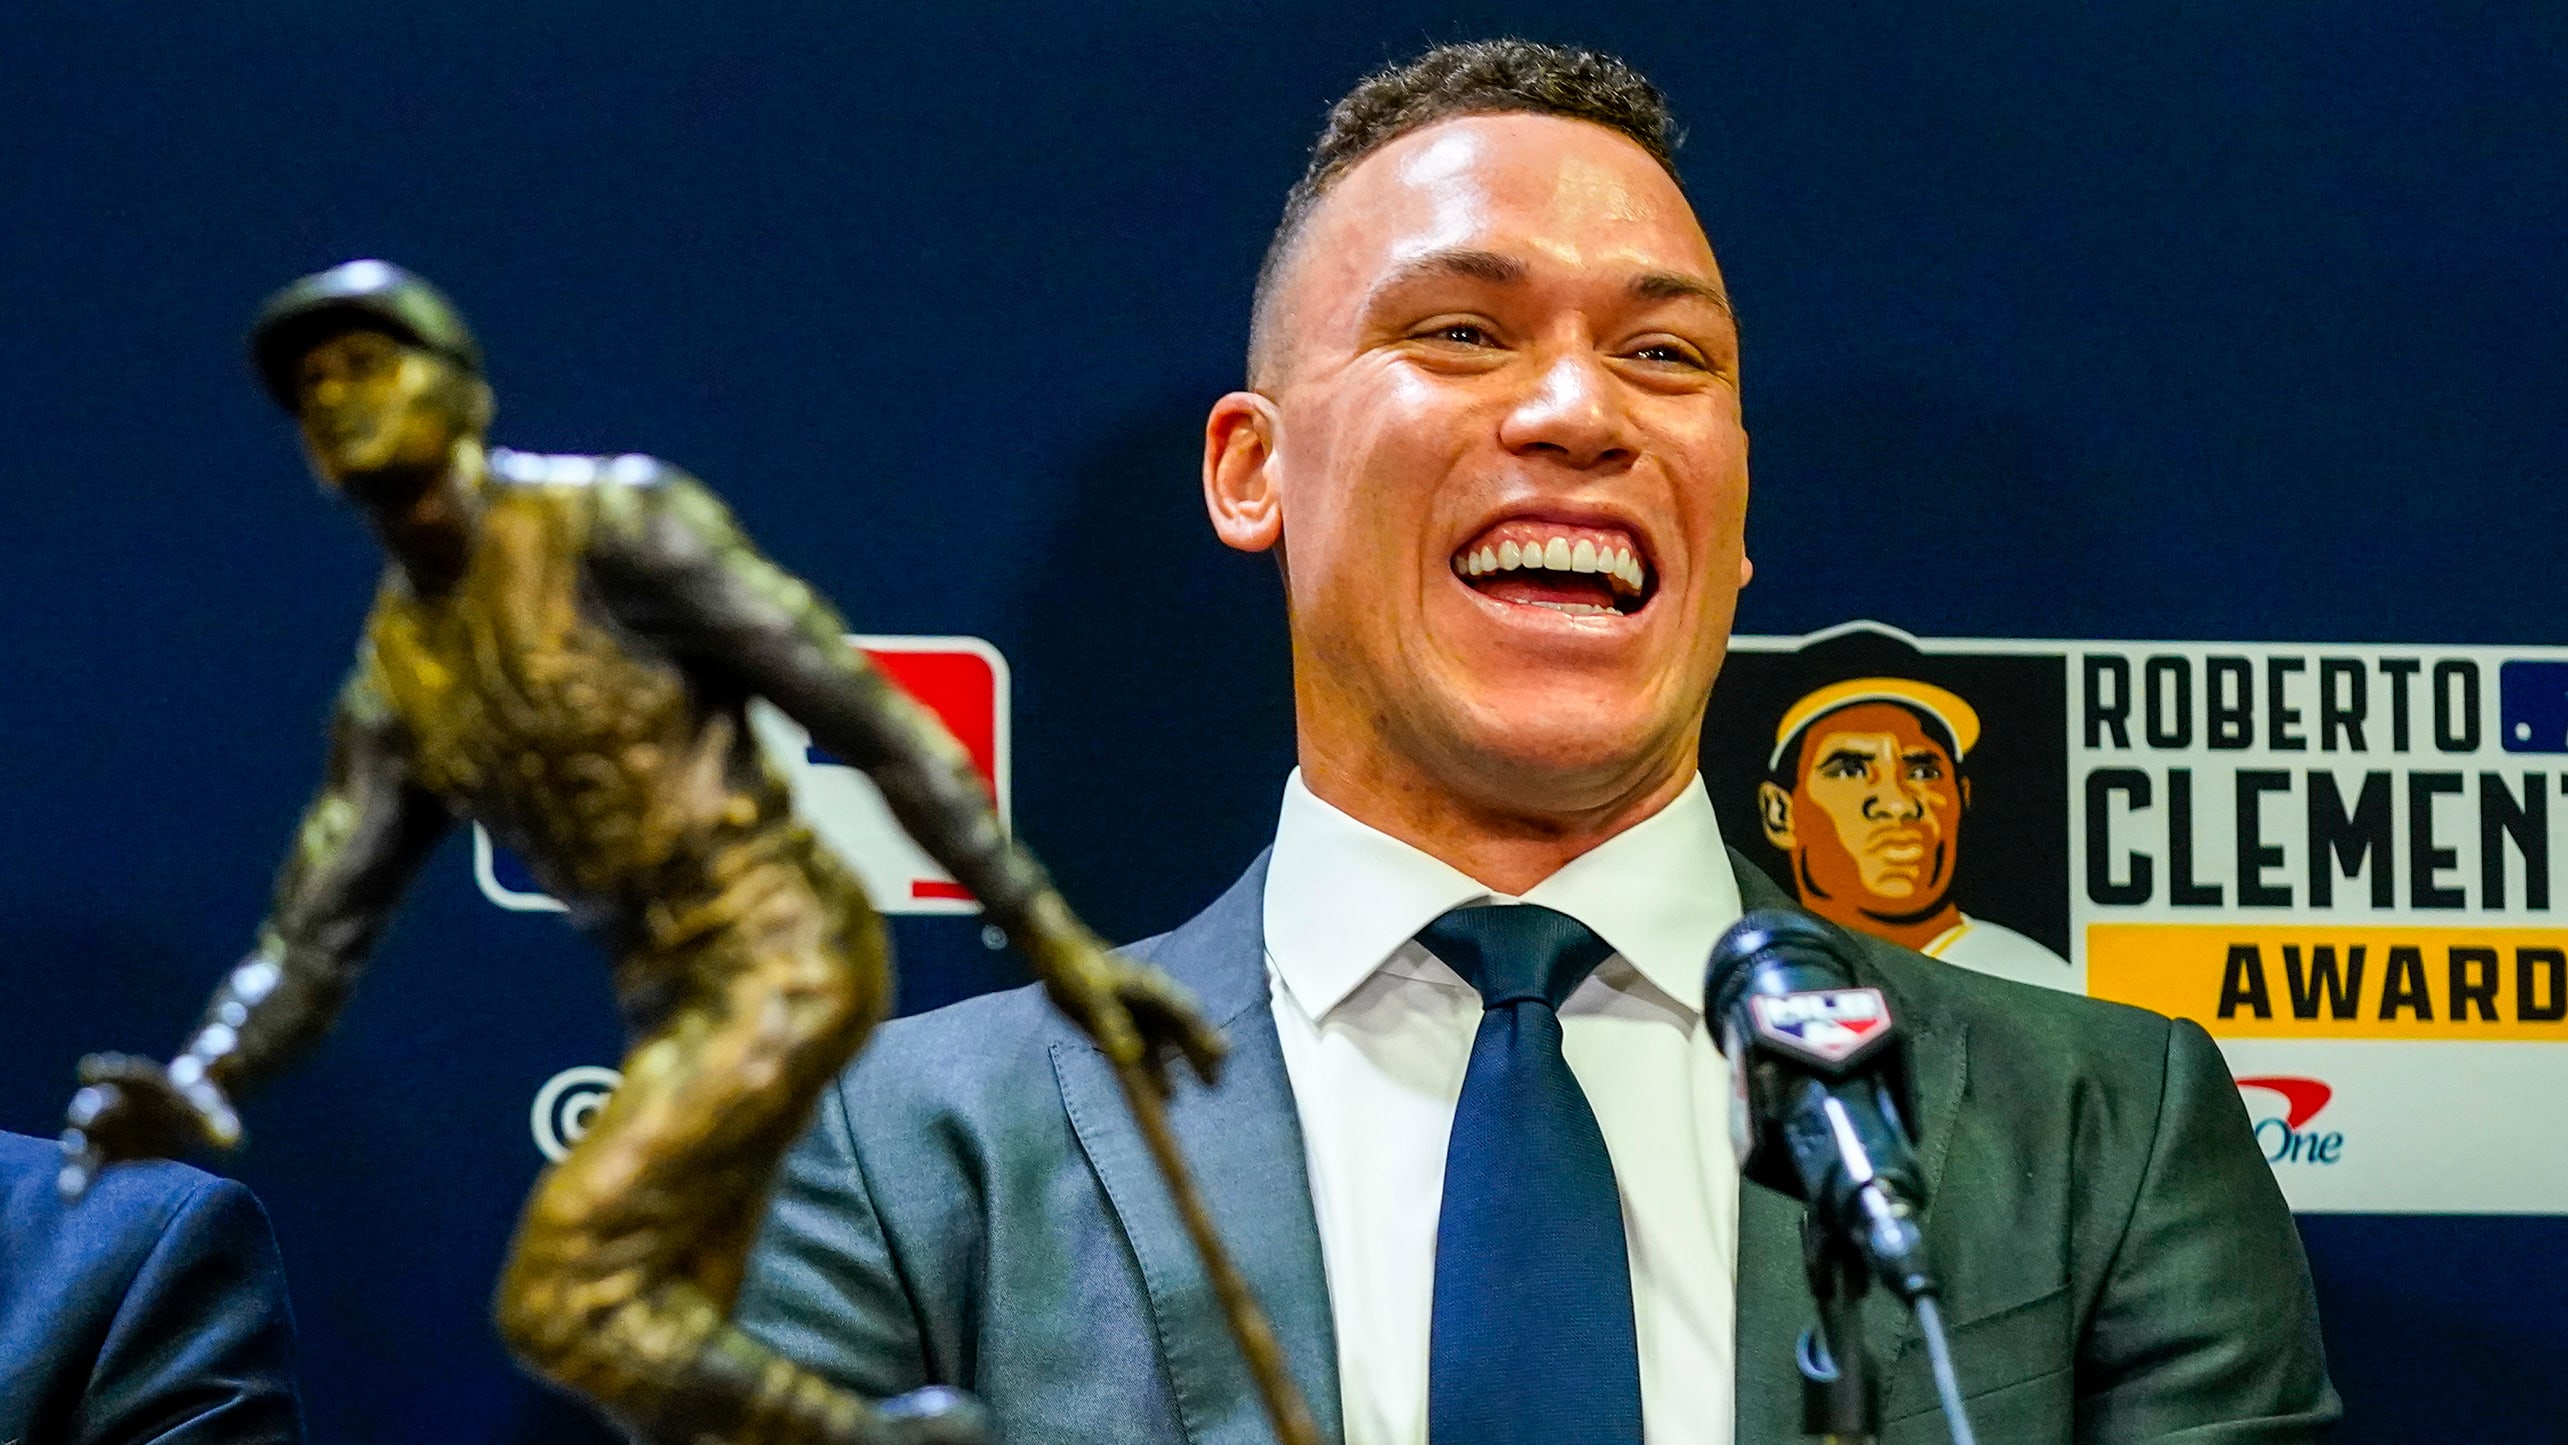 Aaron Judge laughs with the Roberto Clemente Award trophy in the foreground